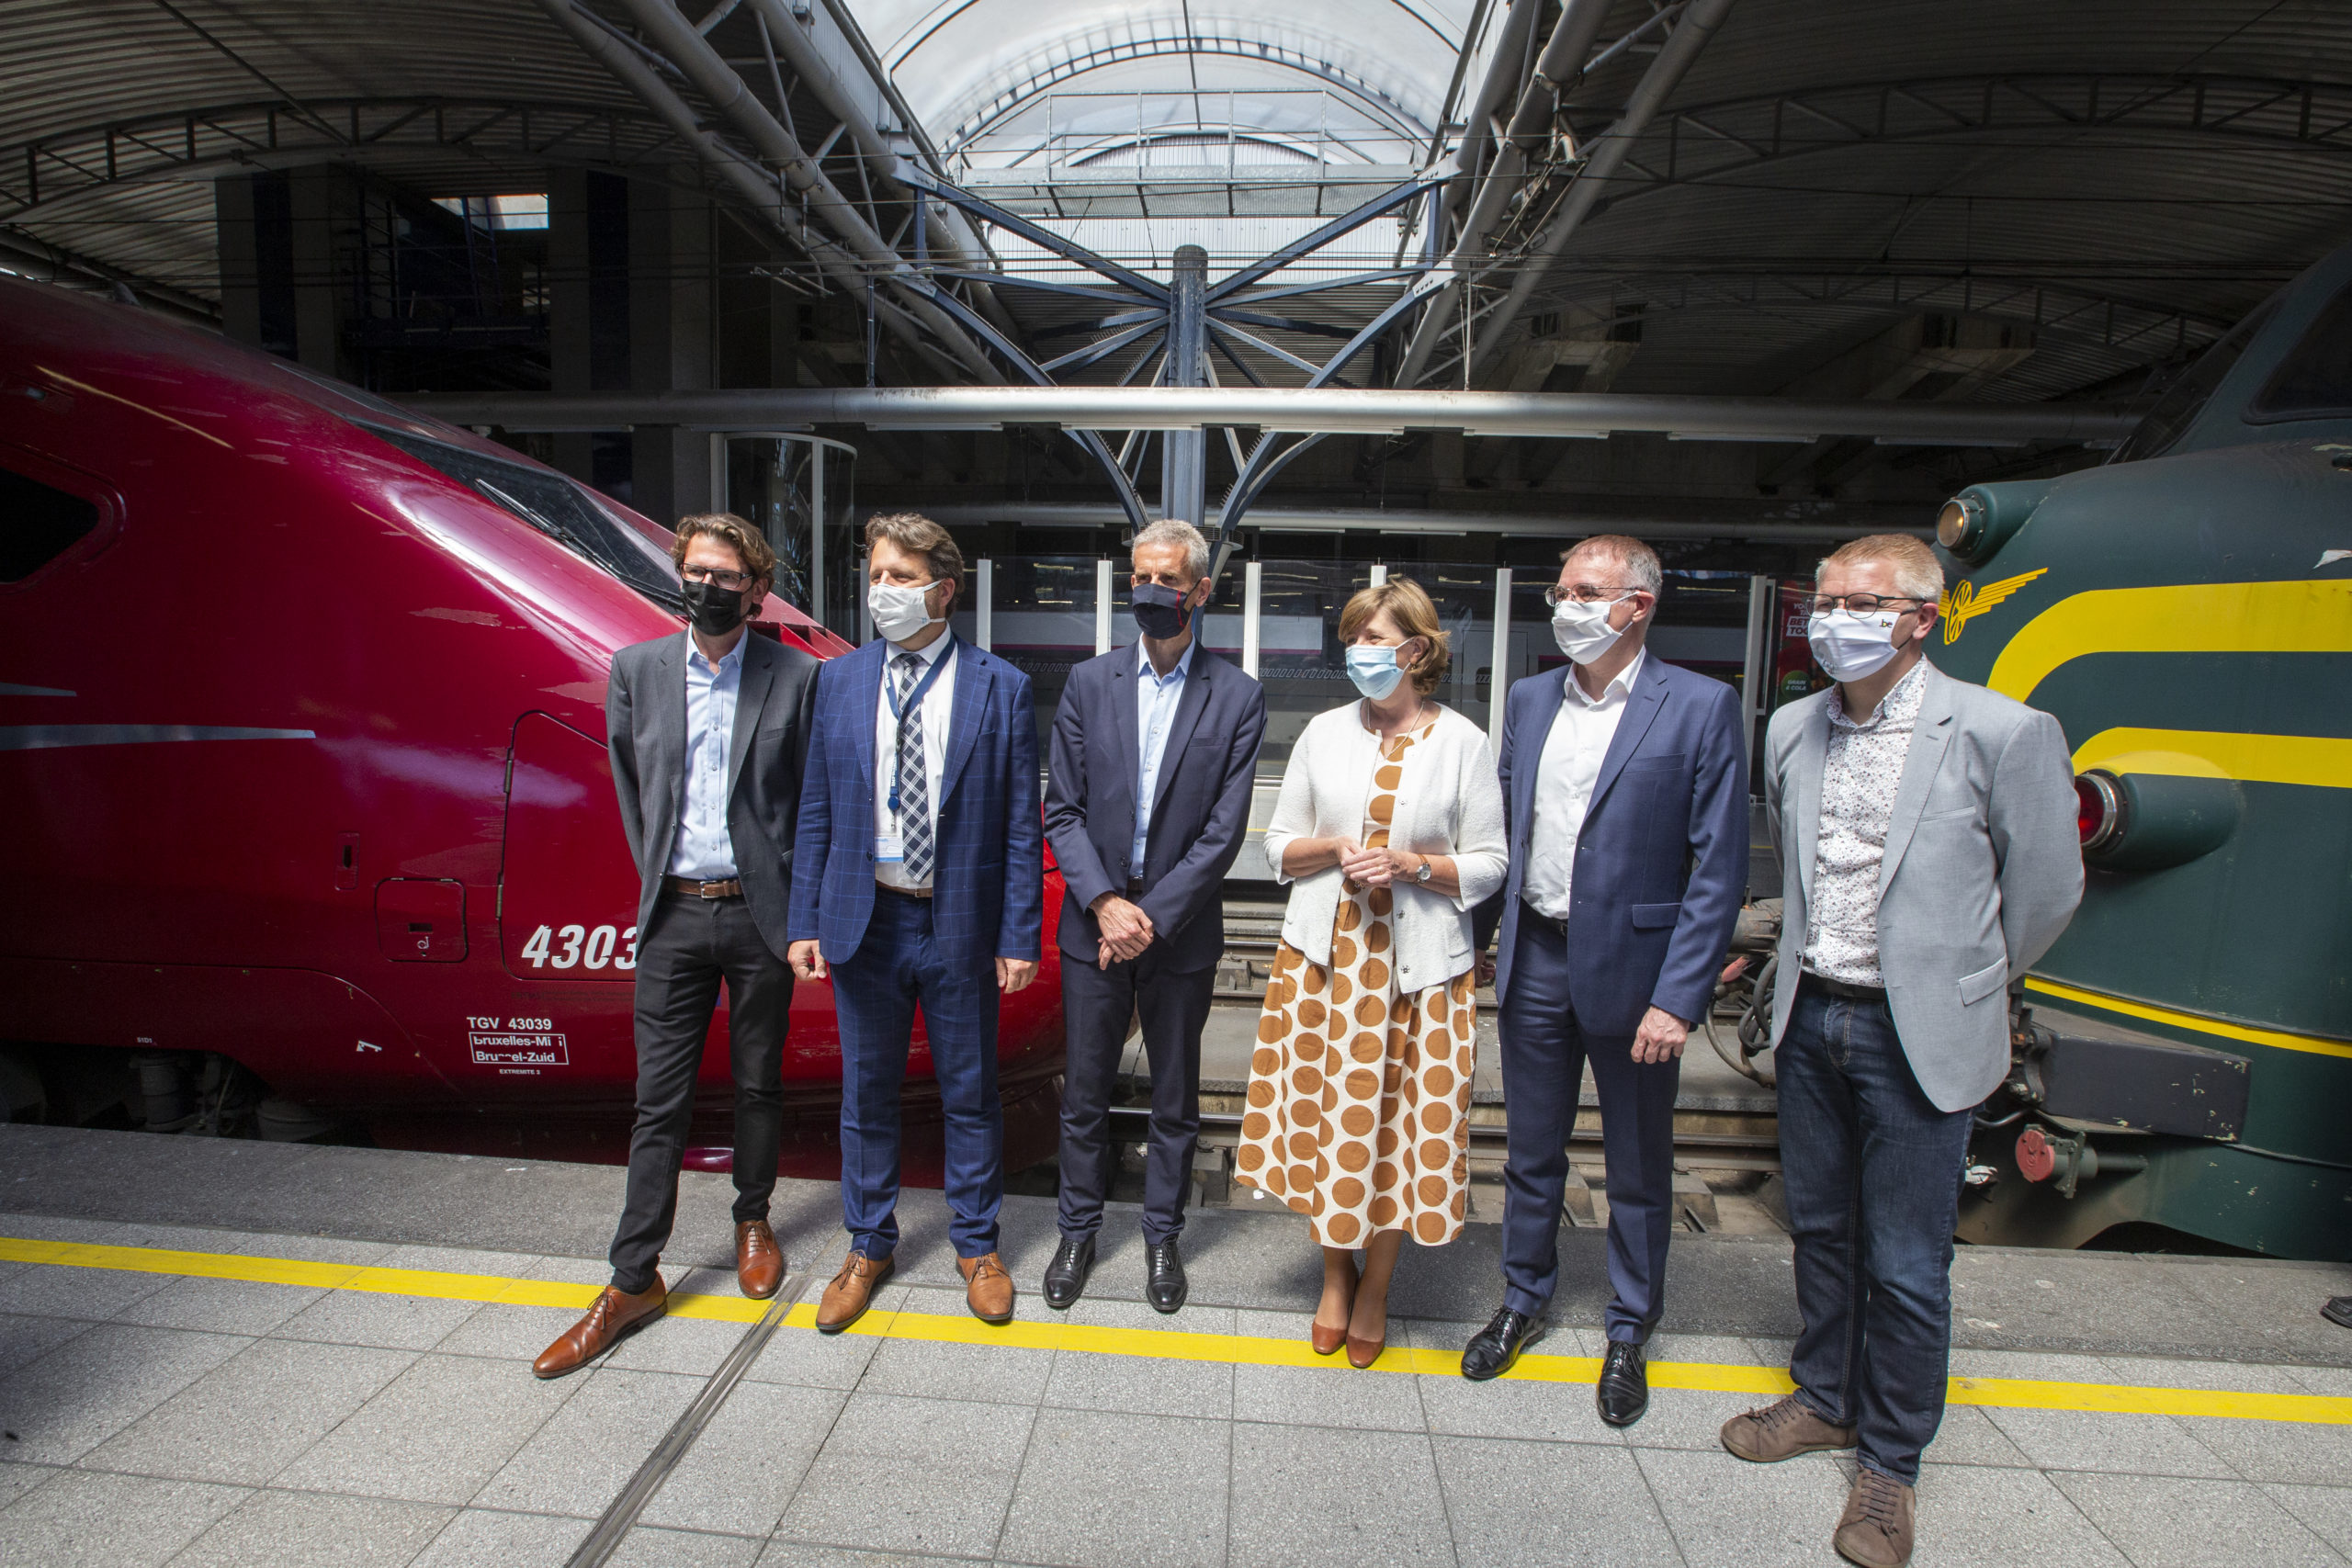 175 years after first train Paris-Brussels Thalys sees itself on right track